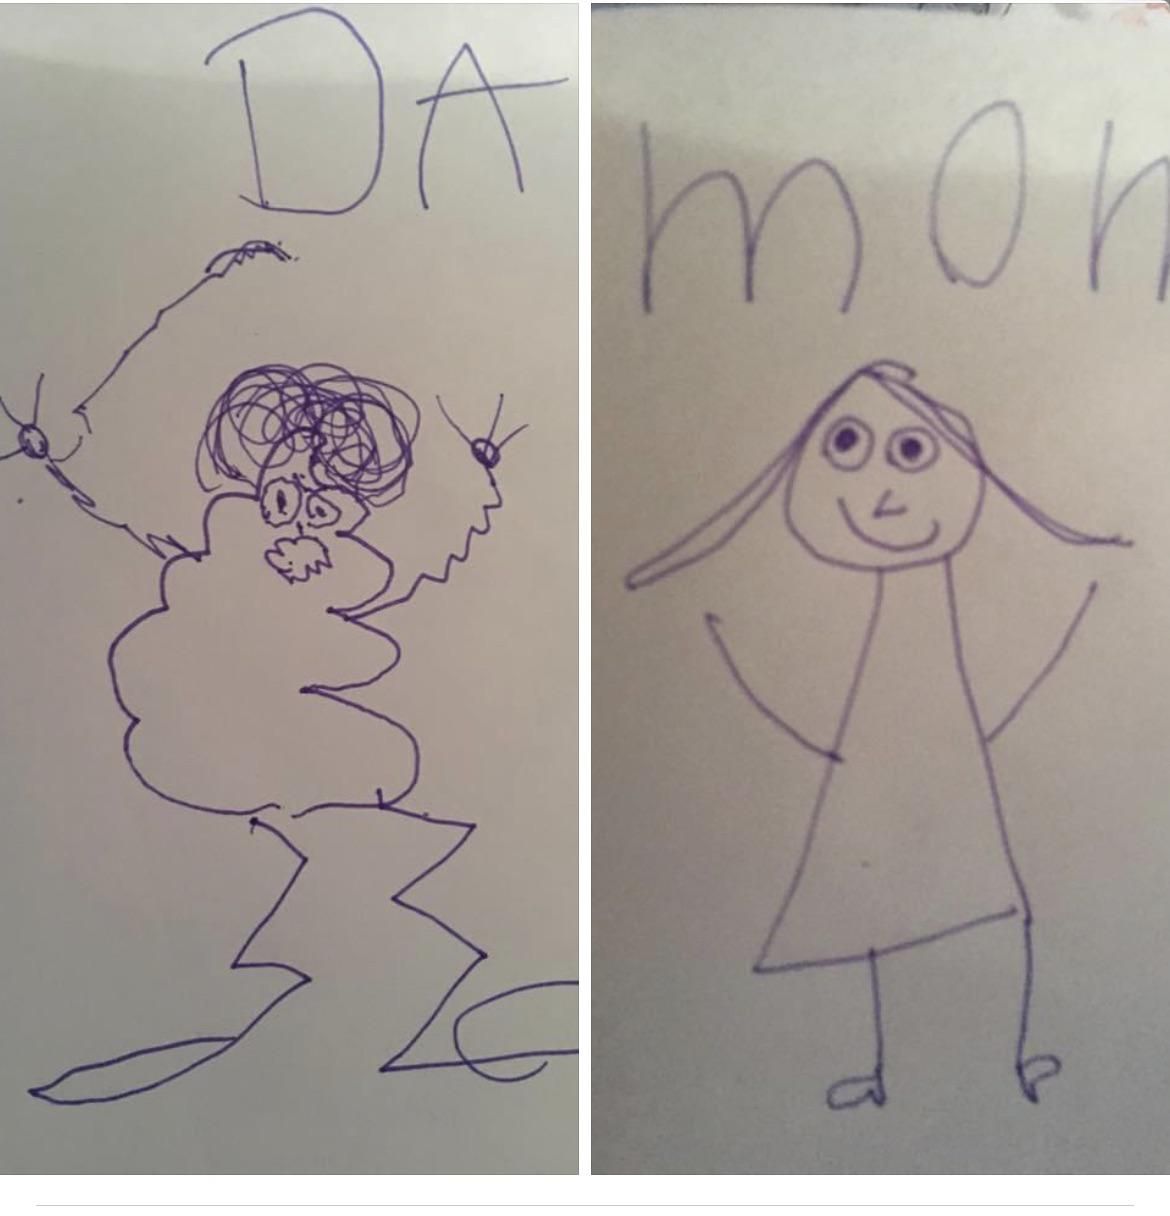 How my kid views me and my wife.